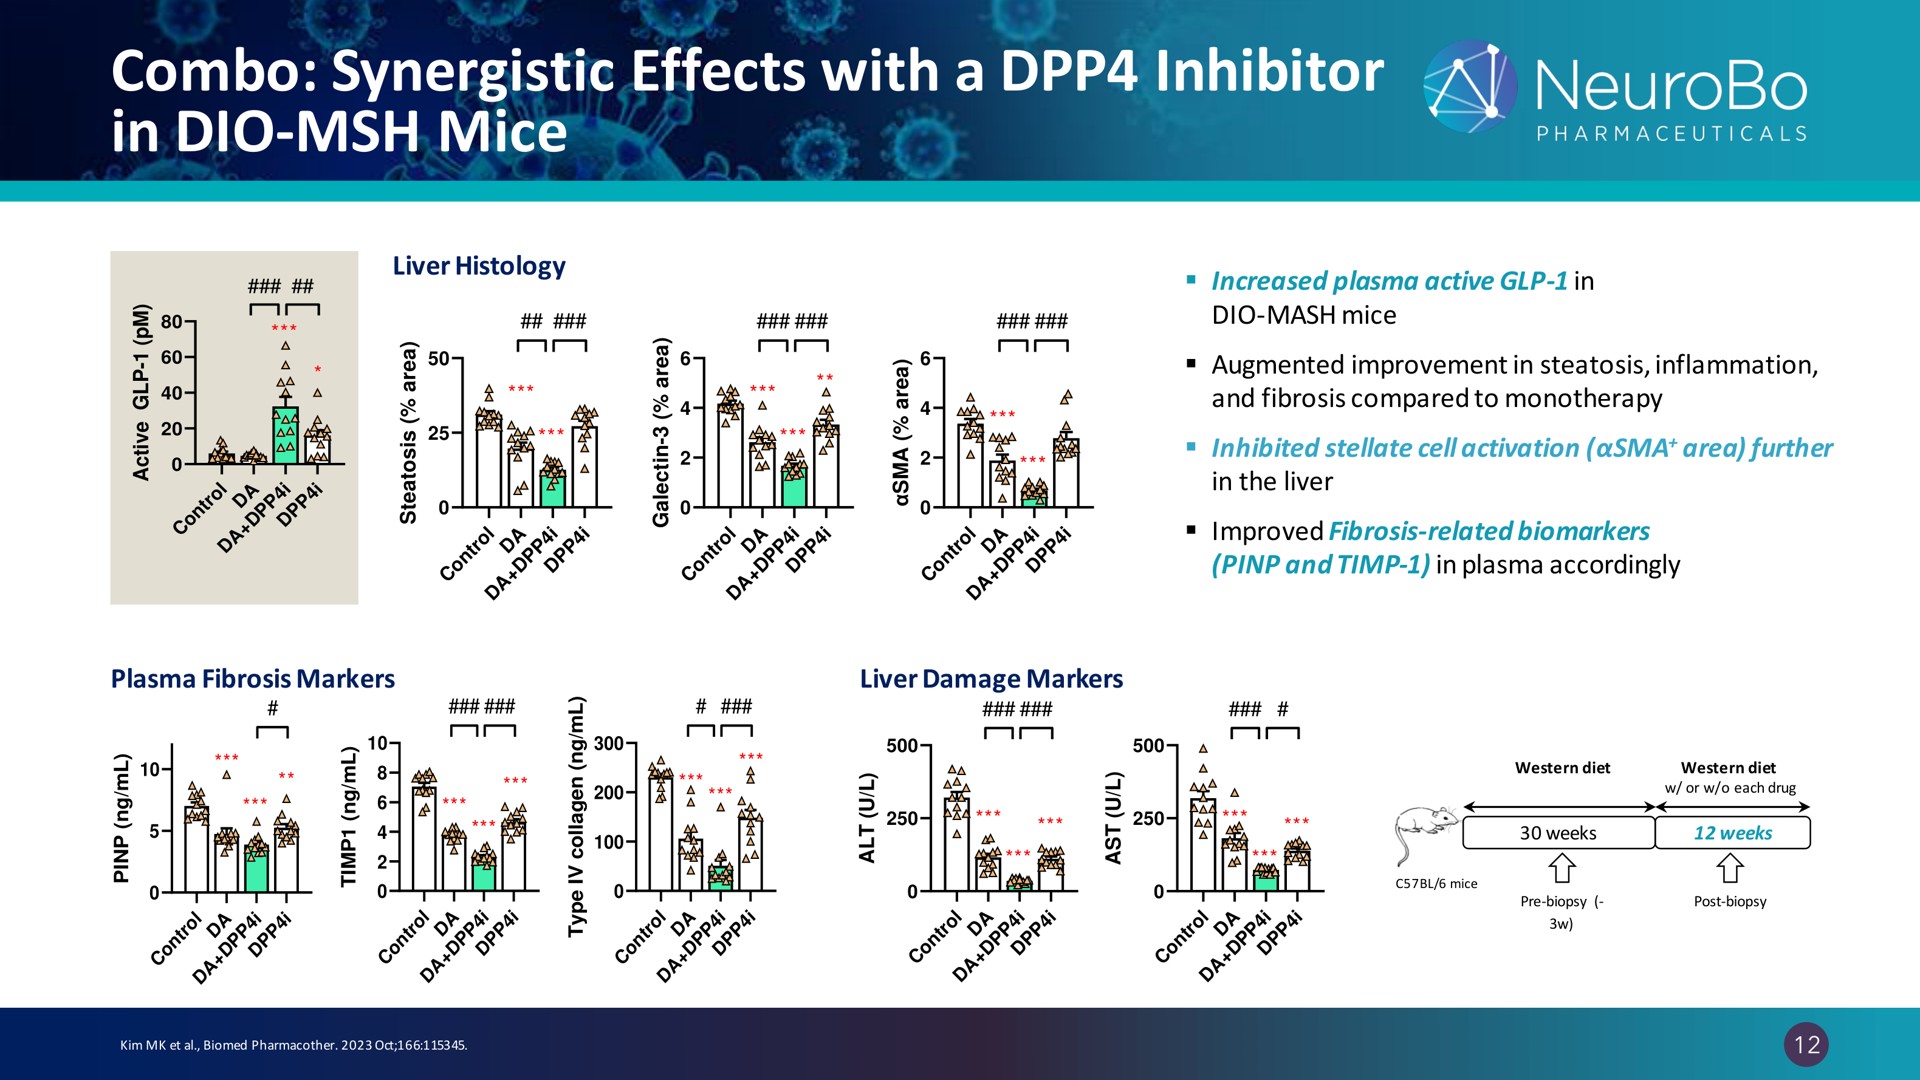 synergistic effects with a inhibitor in mice | NeuroBo Pharmaceuticals